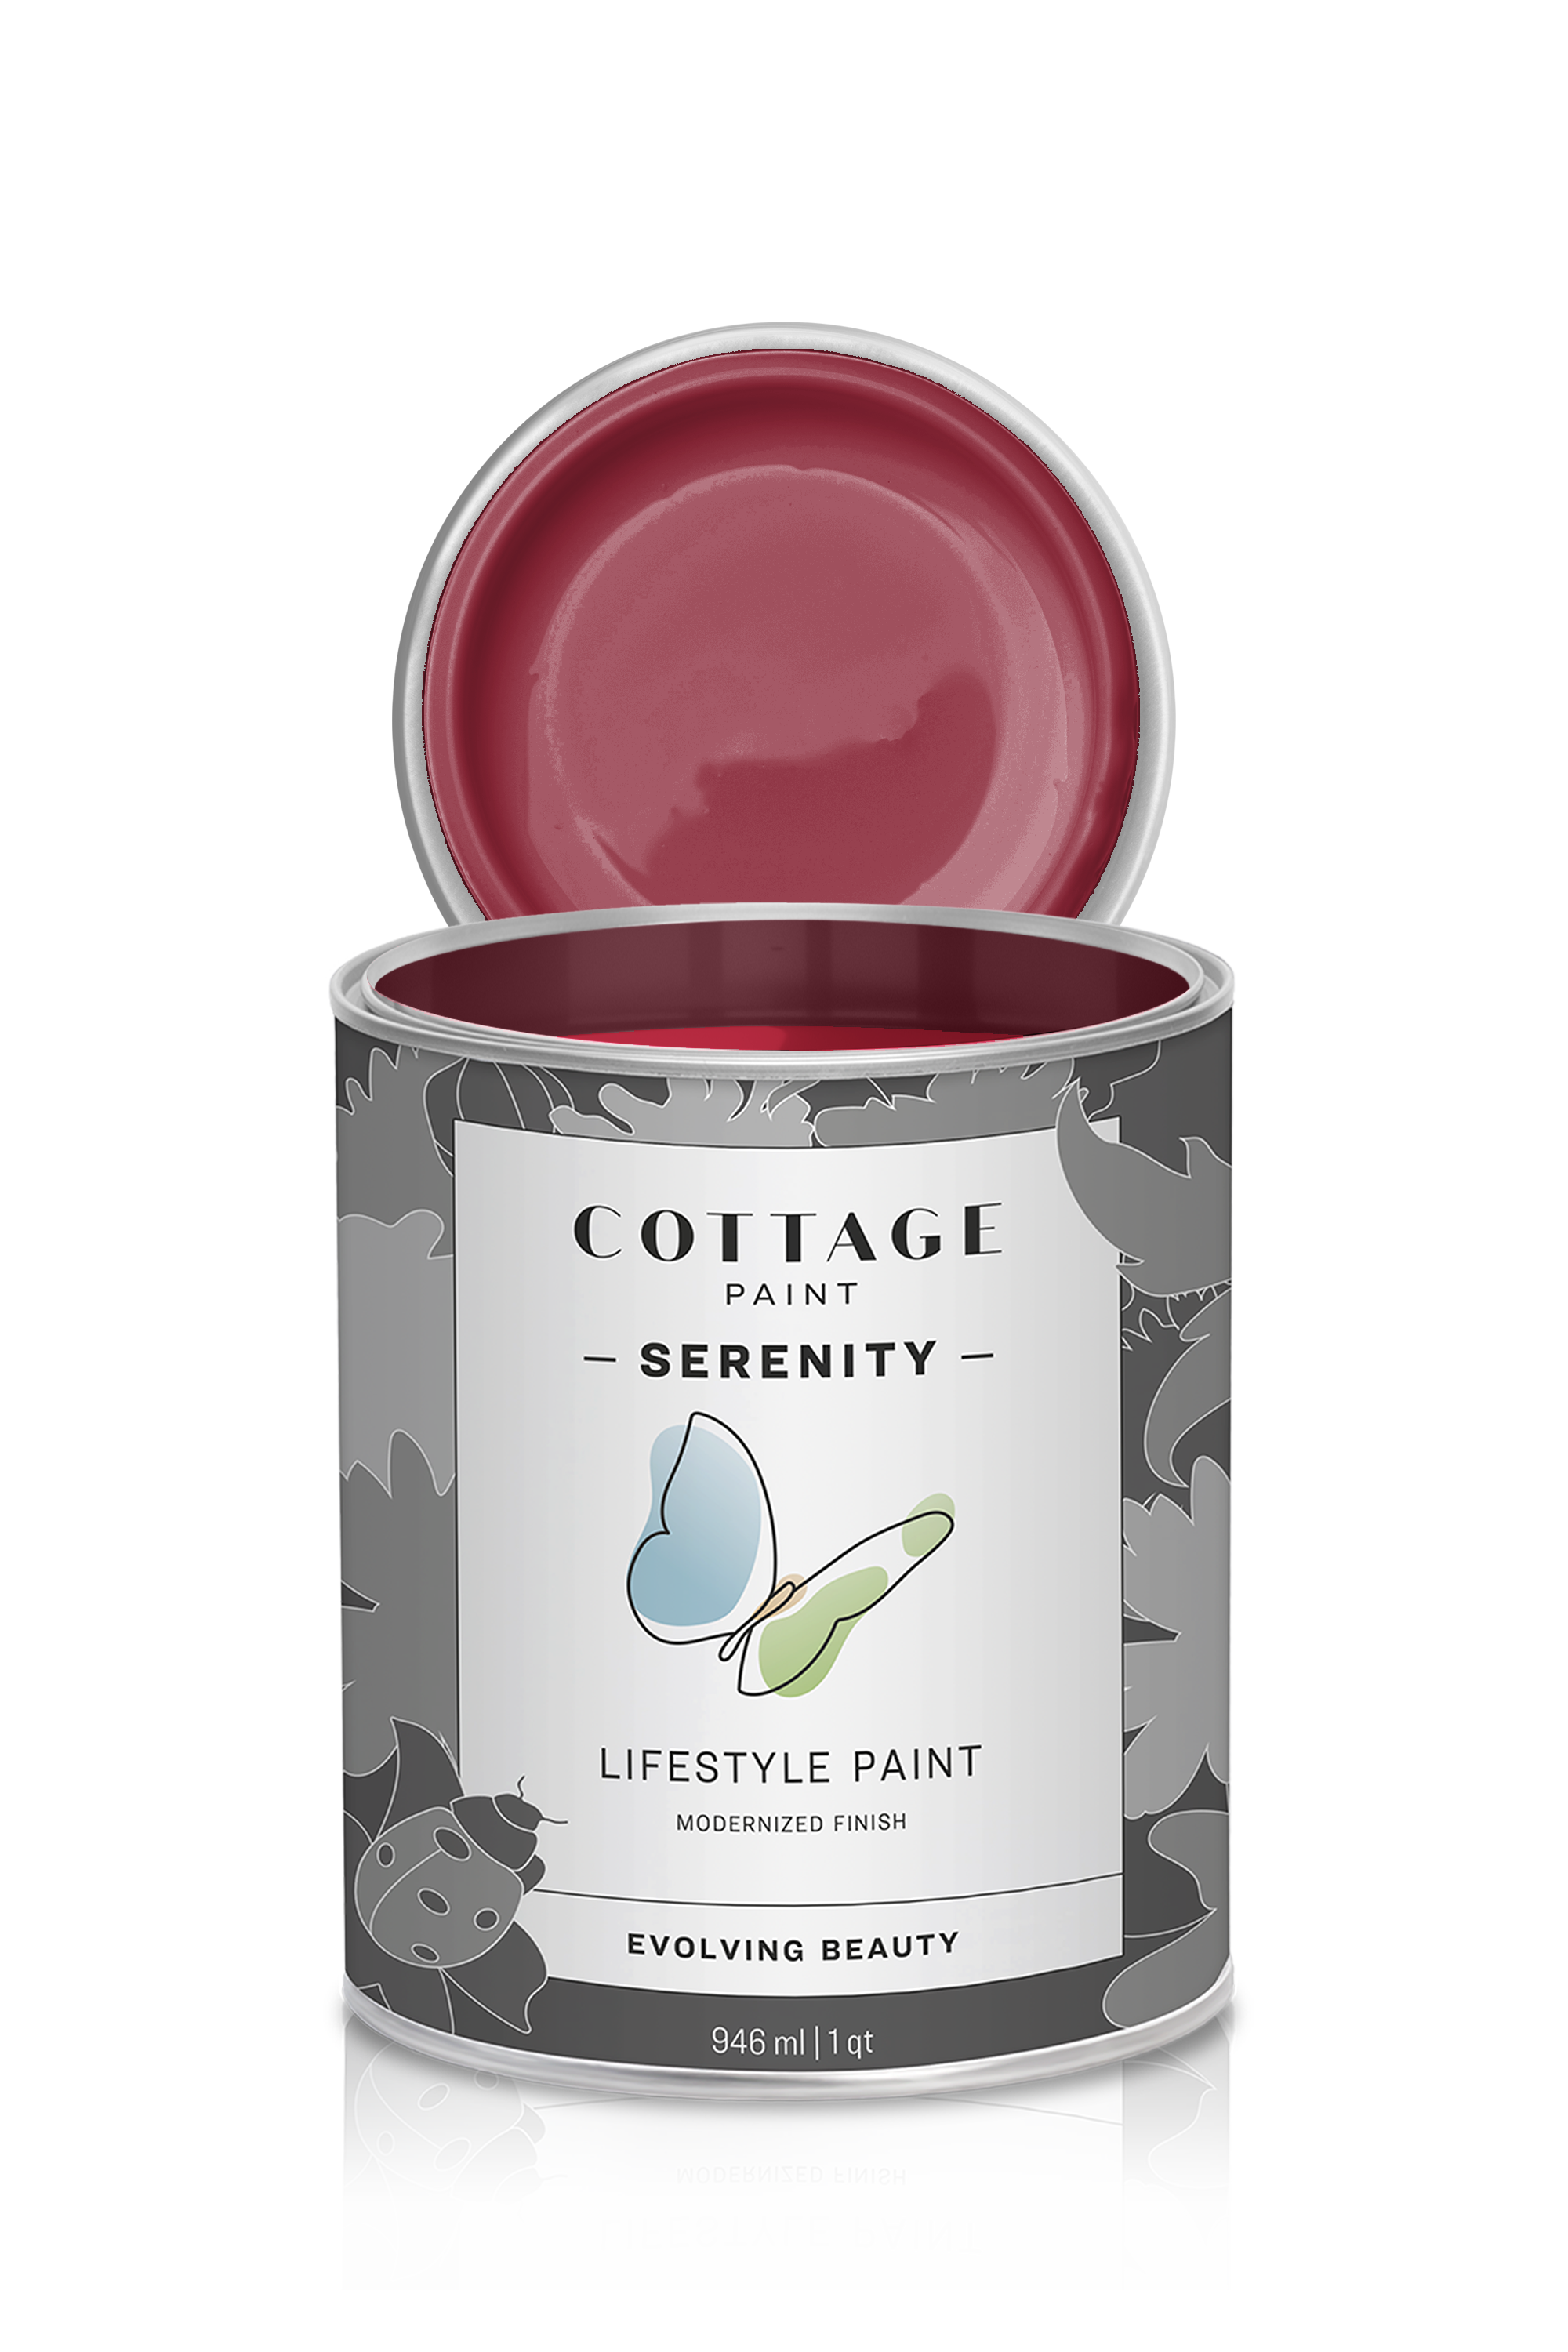 Pinks and Red tones - Serenity Silk Cottage Paint